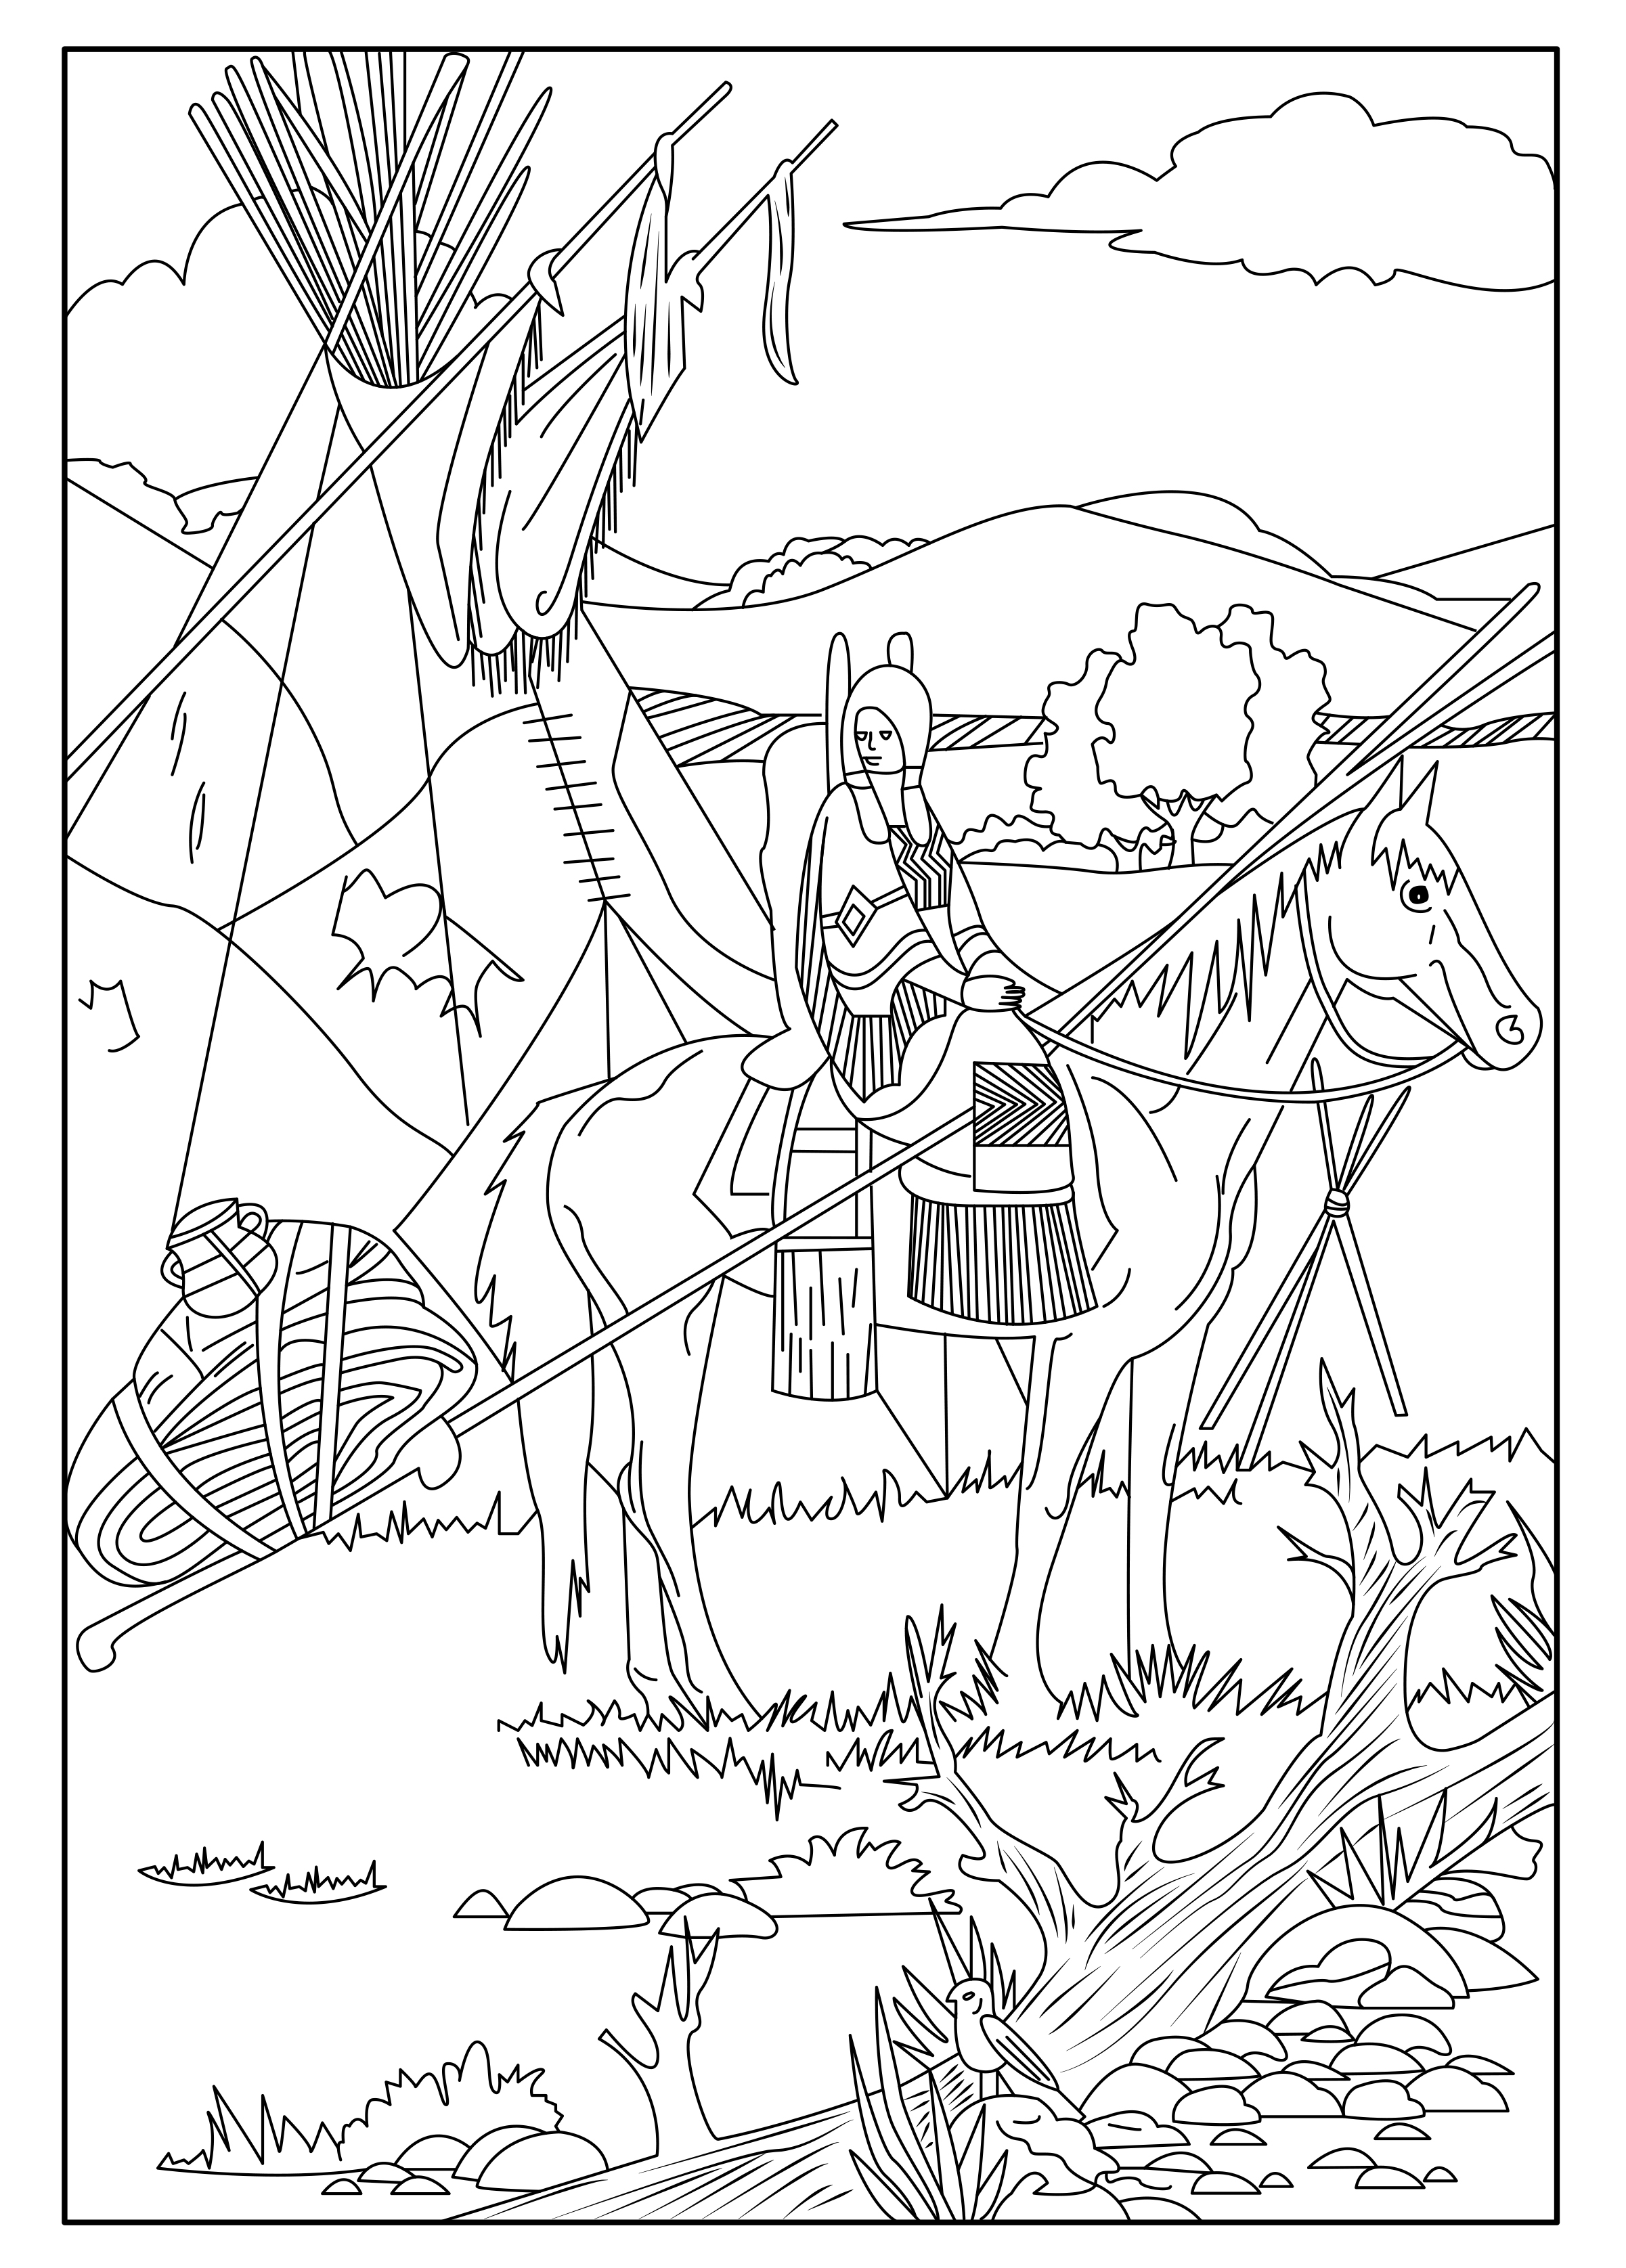 Native american celine - Native American Adult Coloring Pages